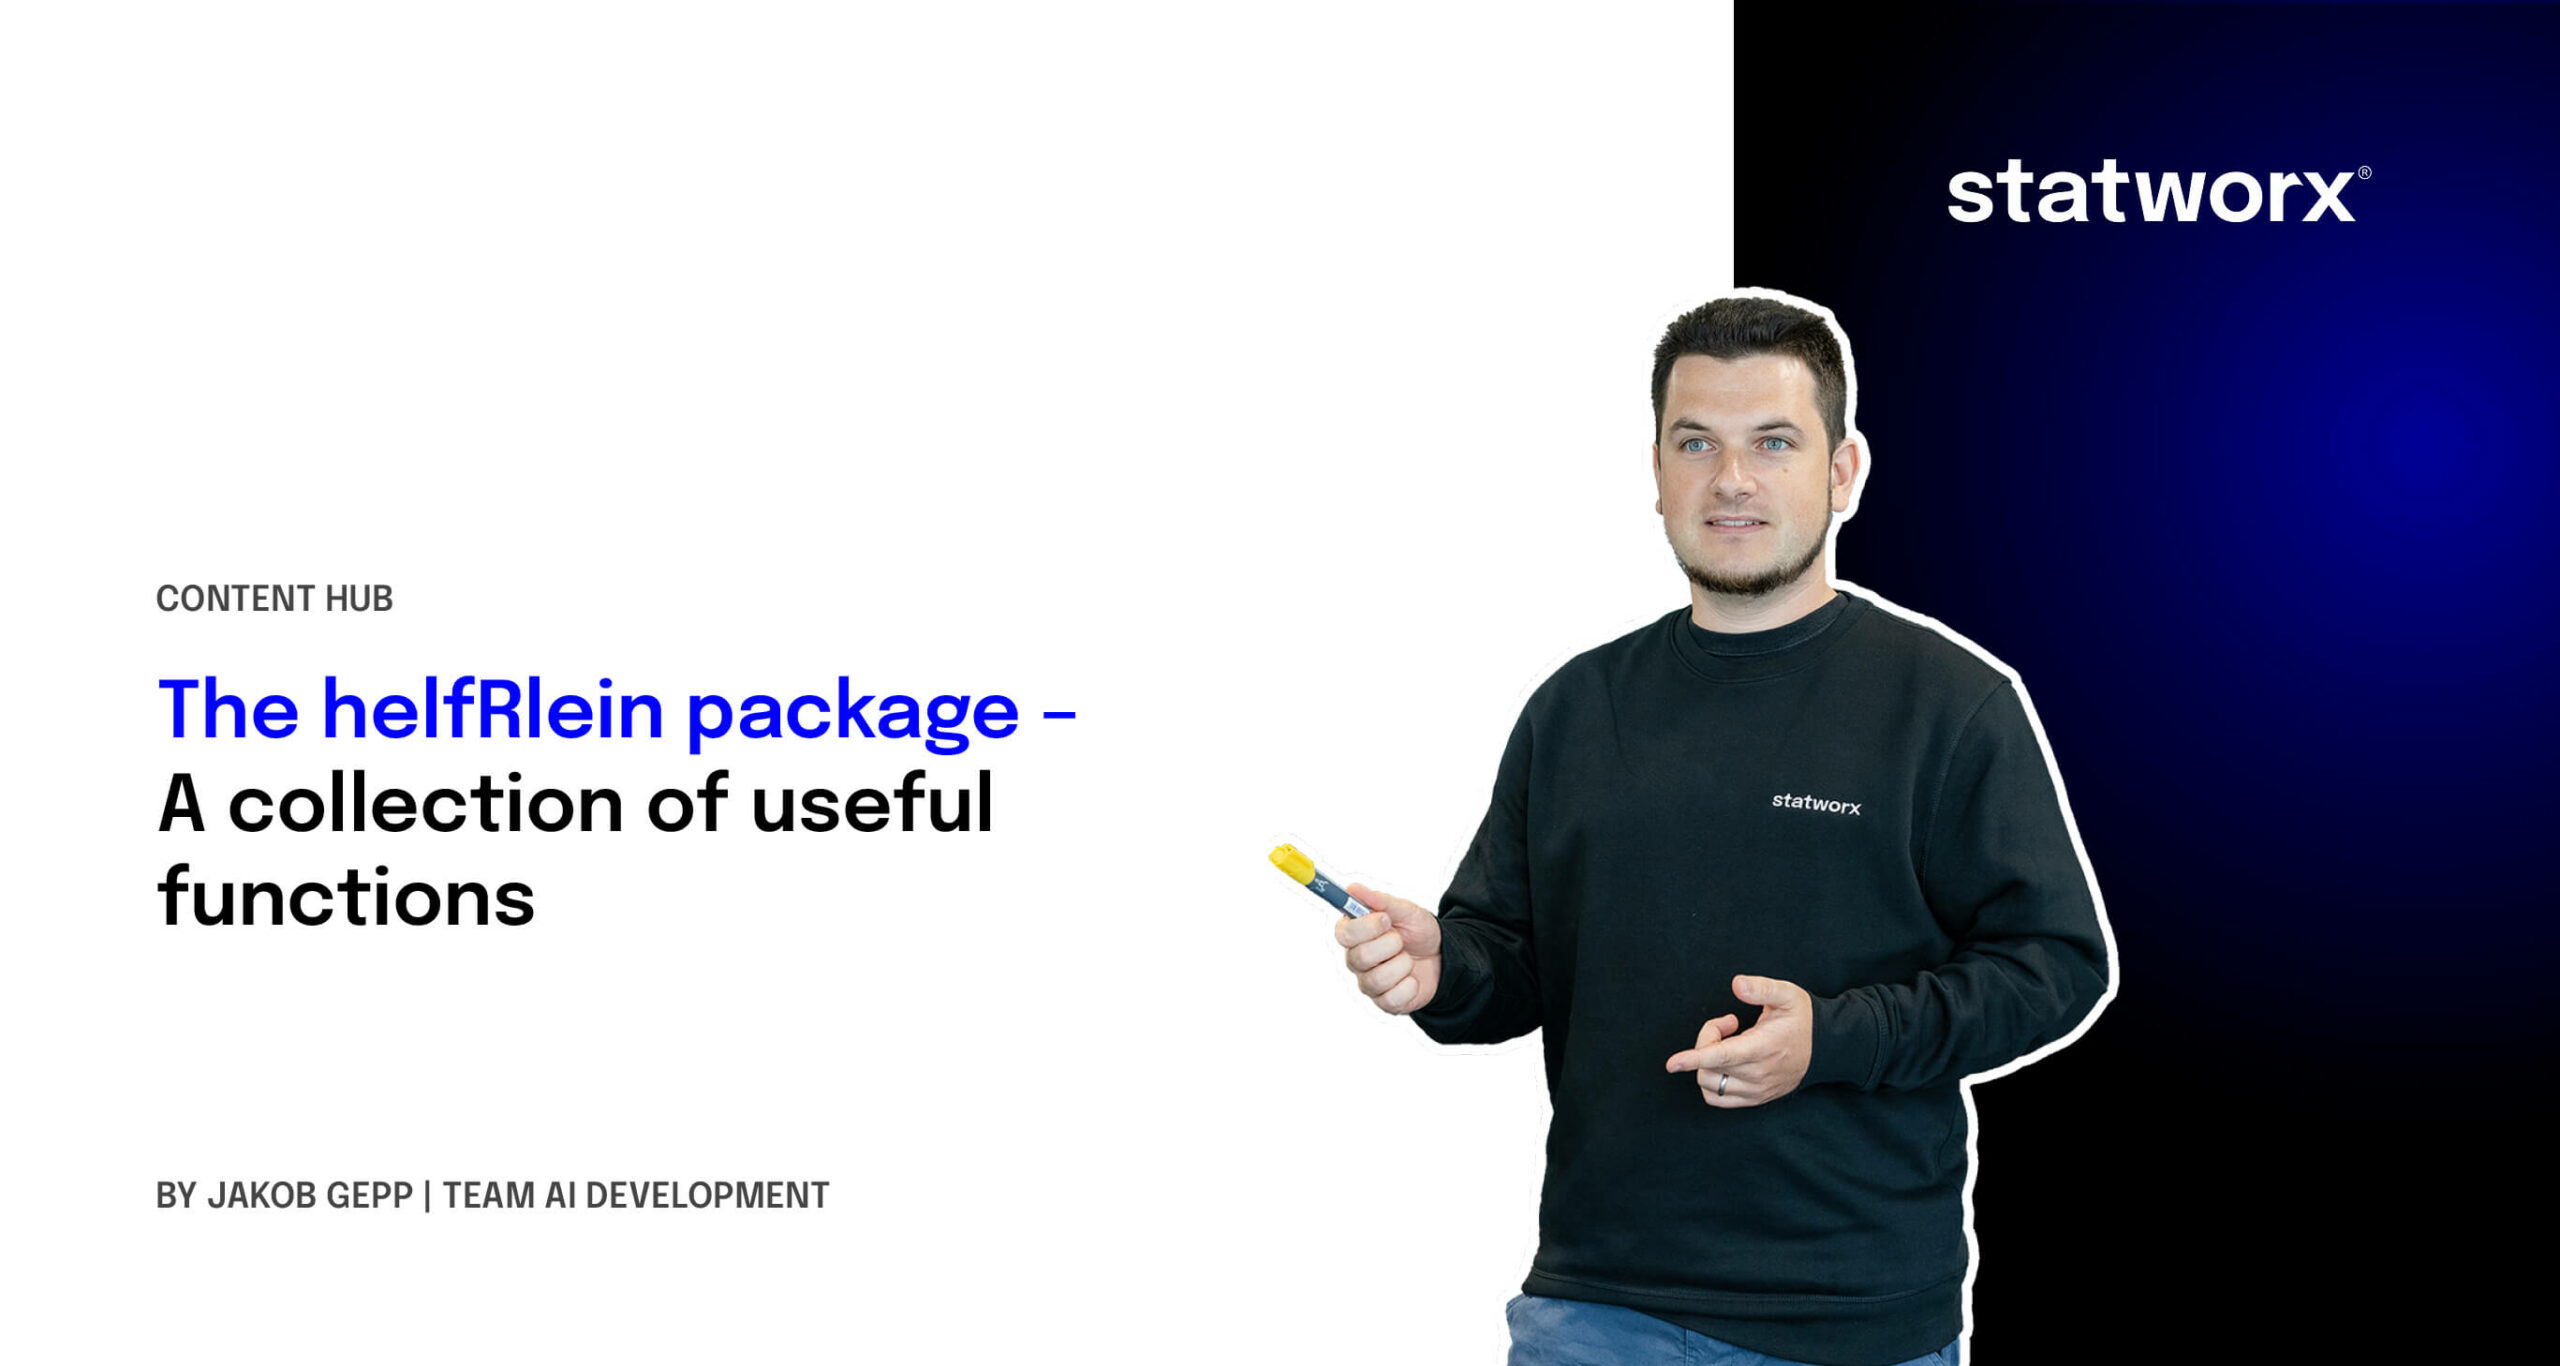 The helfRlein package – A collection of useful functions